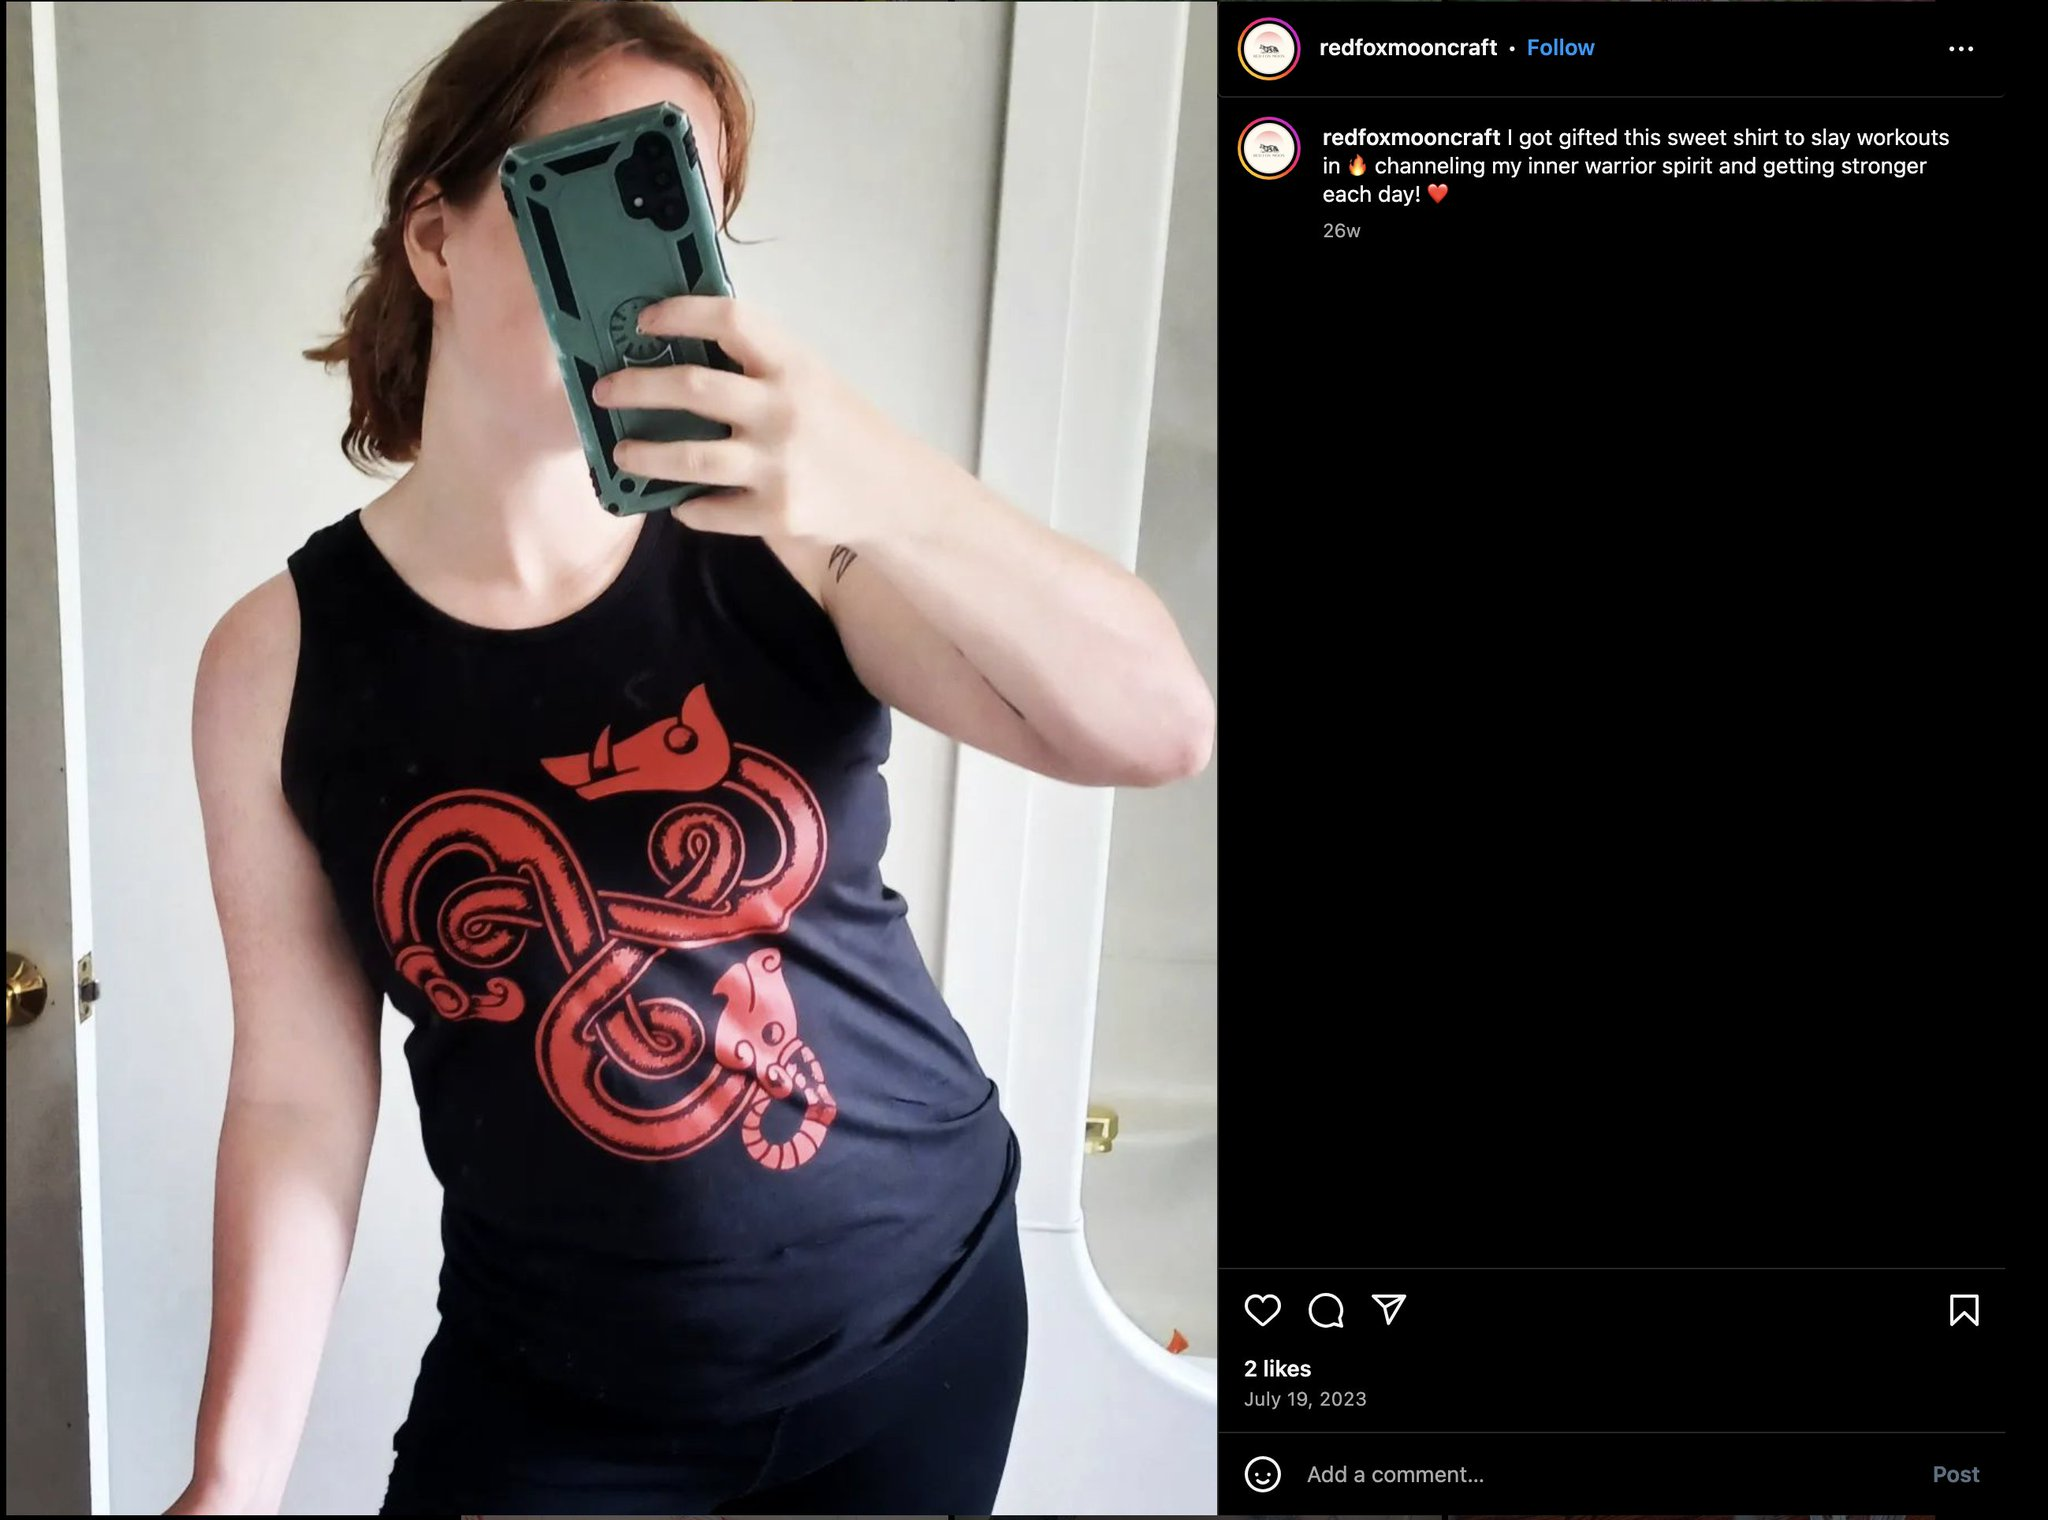 Ashley holding her phone over her face taking a picture in the mirror while wearing a Vinland Battlewear shirt.